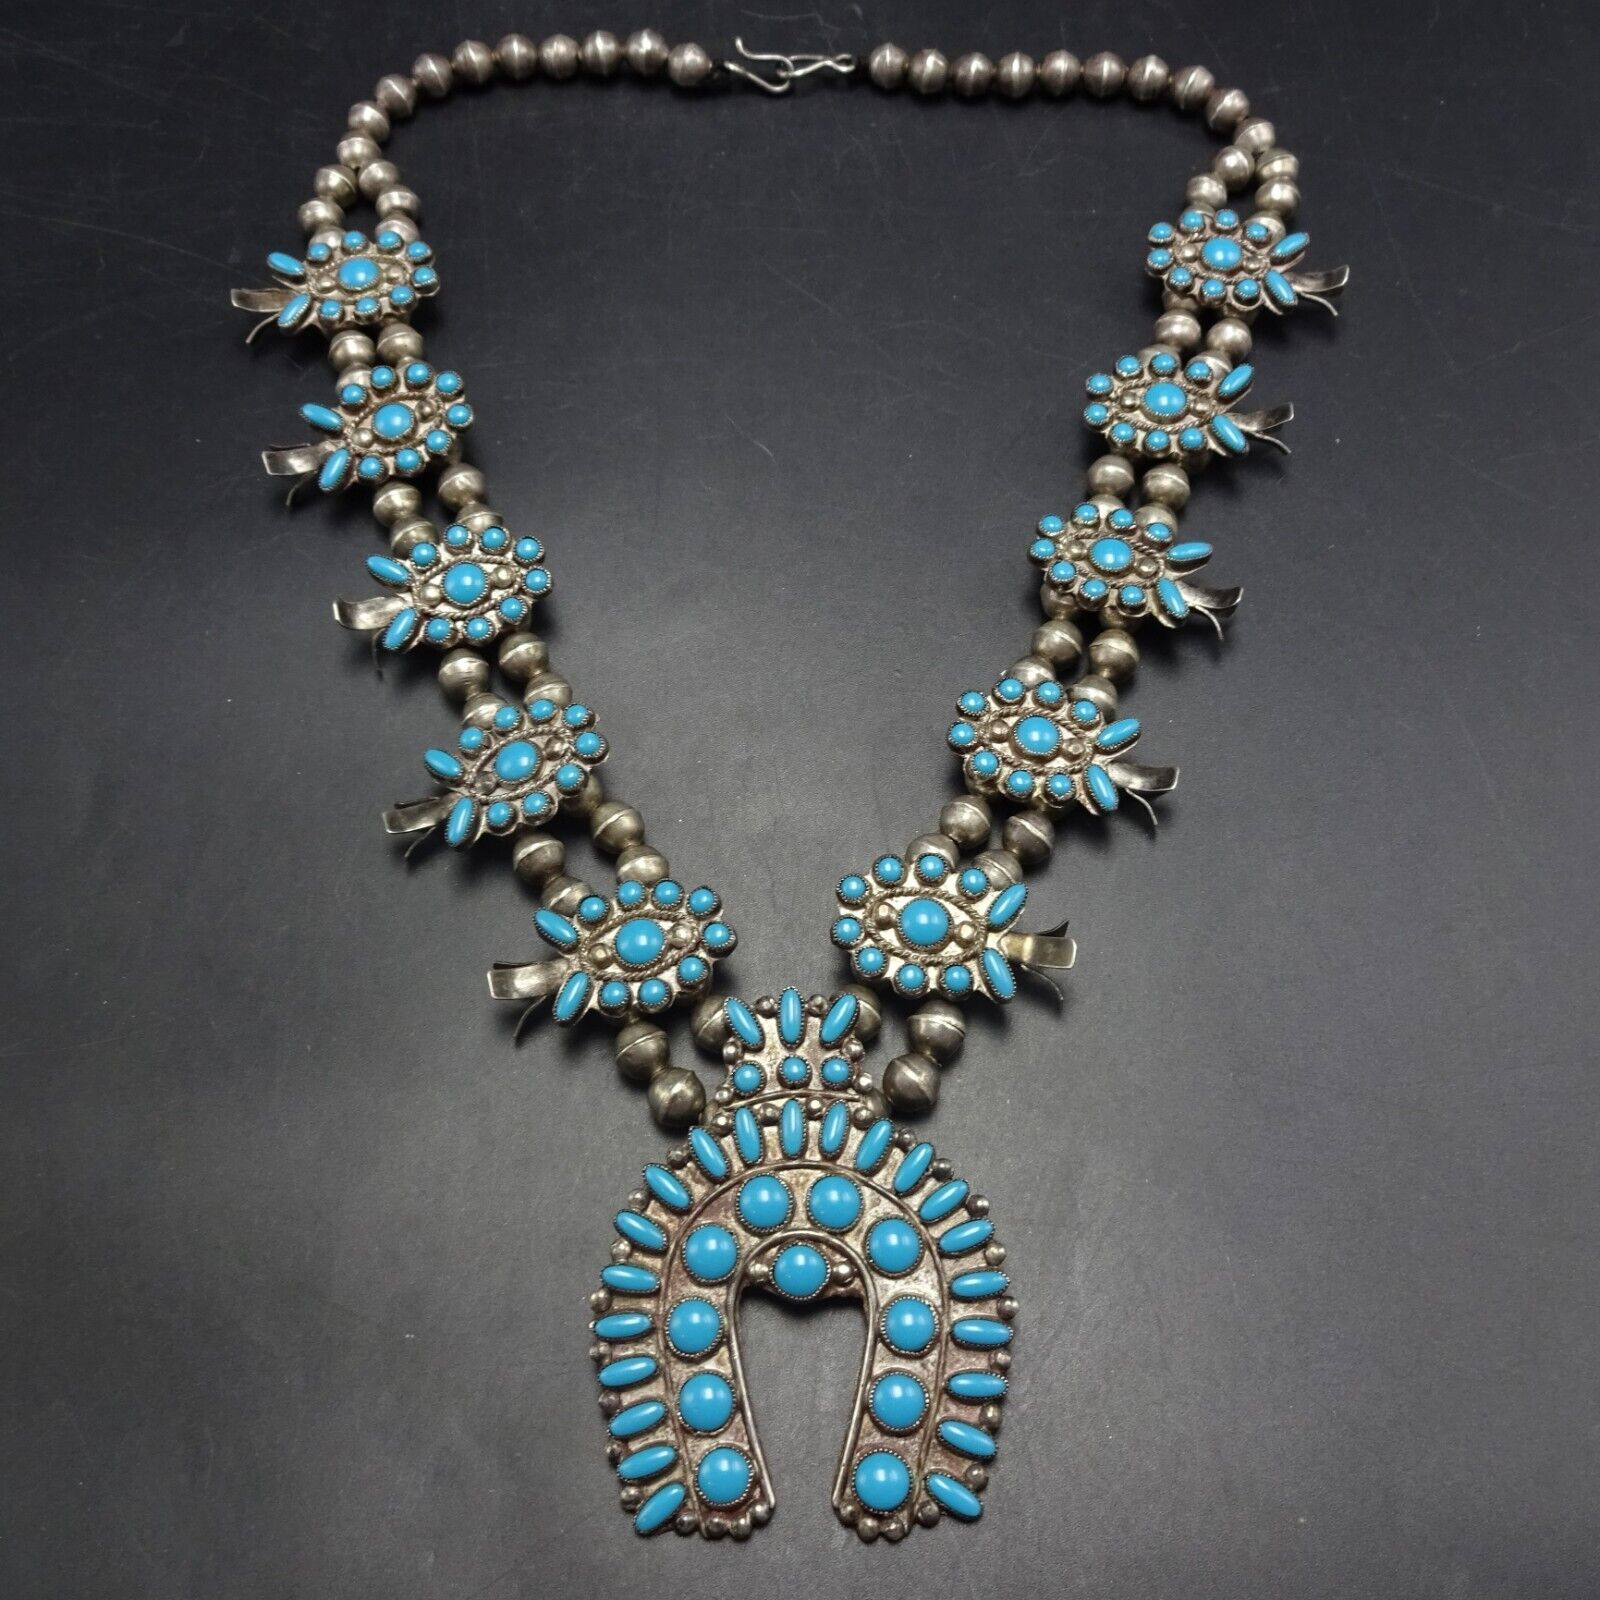 Rare 1920s OLD PAWN SQUASH BLOSSOM NECKLACE with Blue Hubbell Glass Cabochons